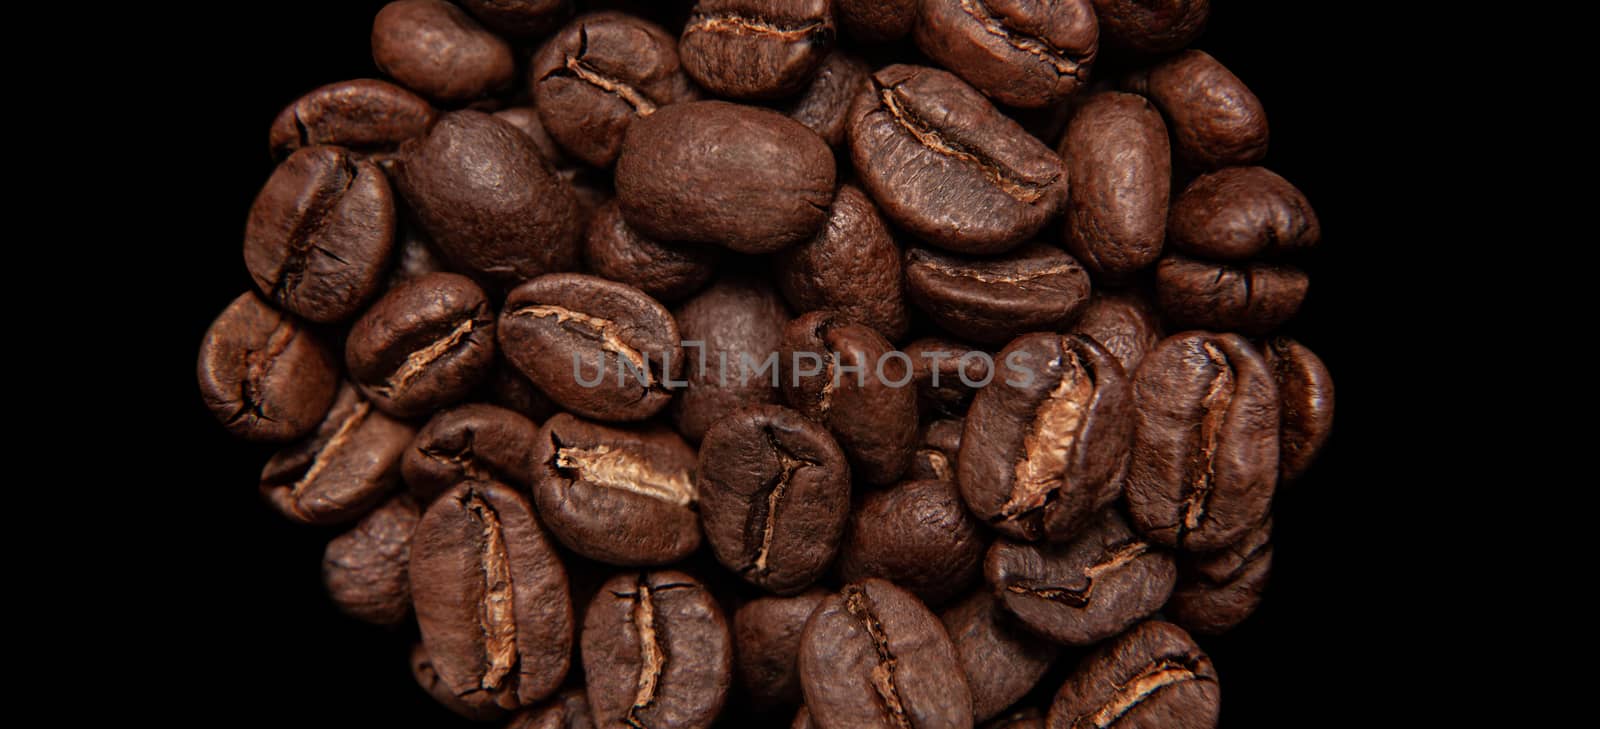 Roasted coffee beans isolated in white background cutout by SlayCer